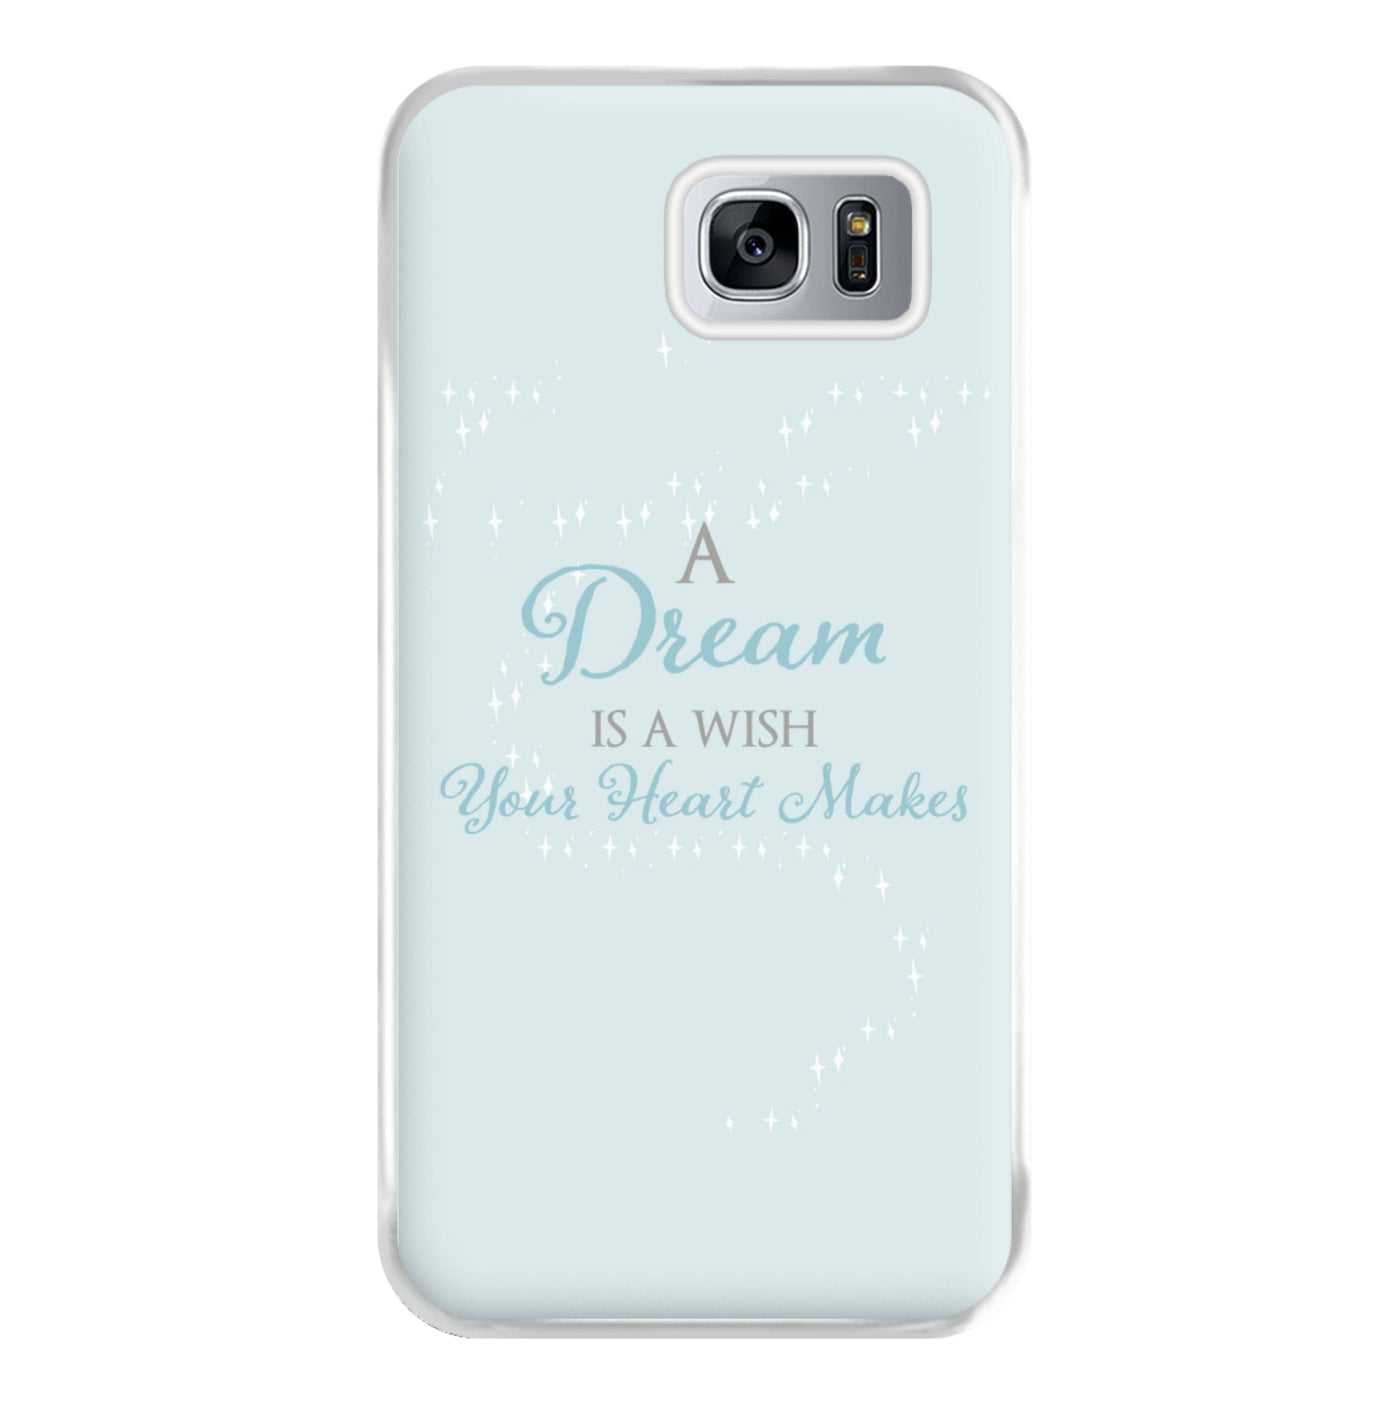 A Dream Is A Wish Your Heart Makes - Disney Phone Case